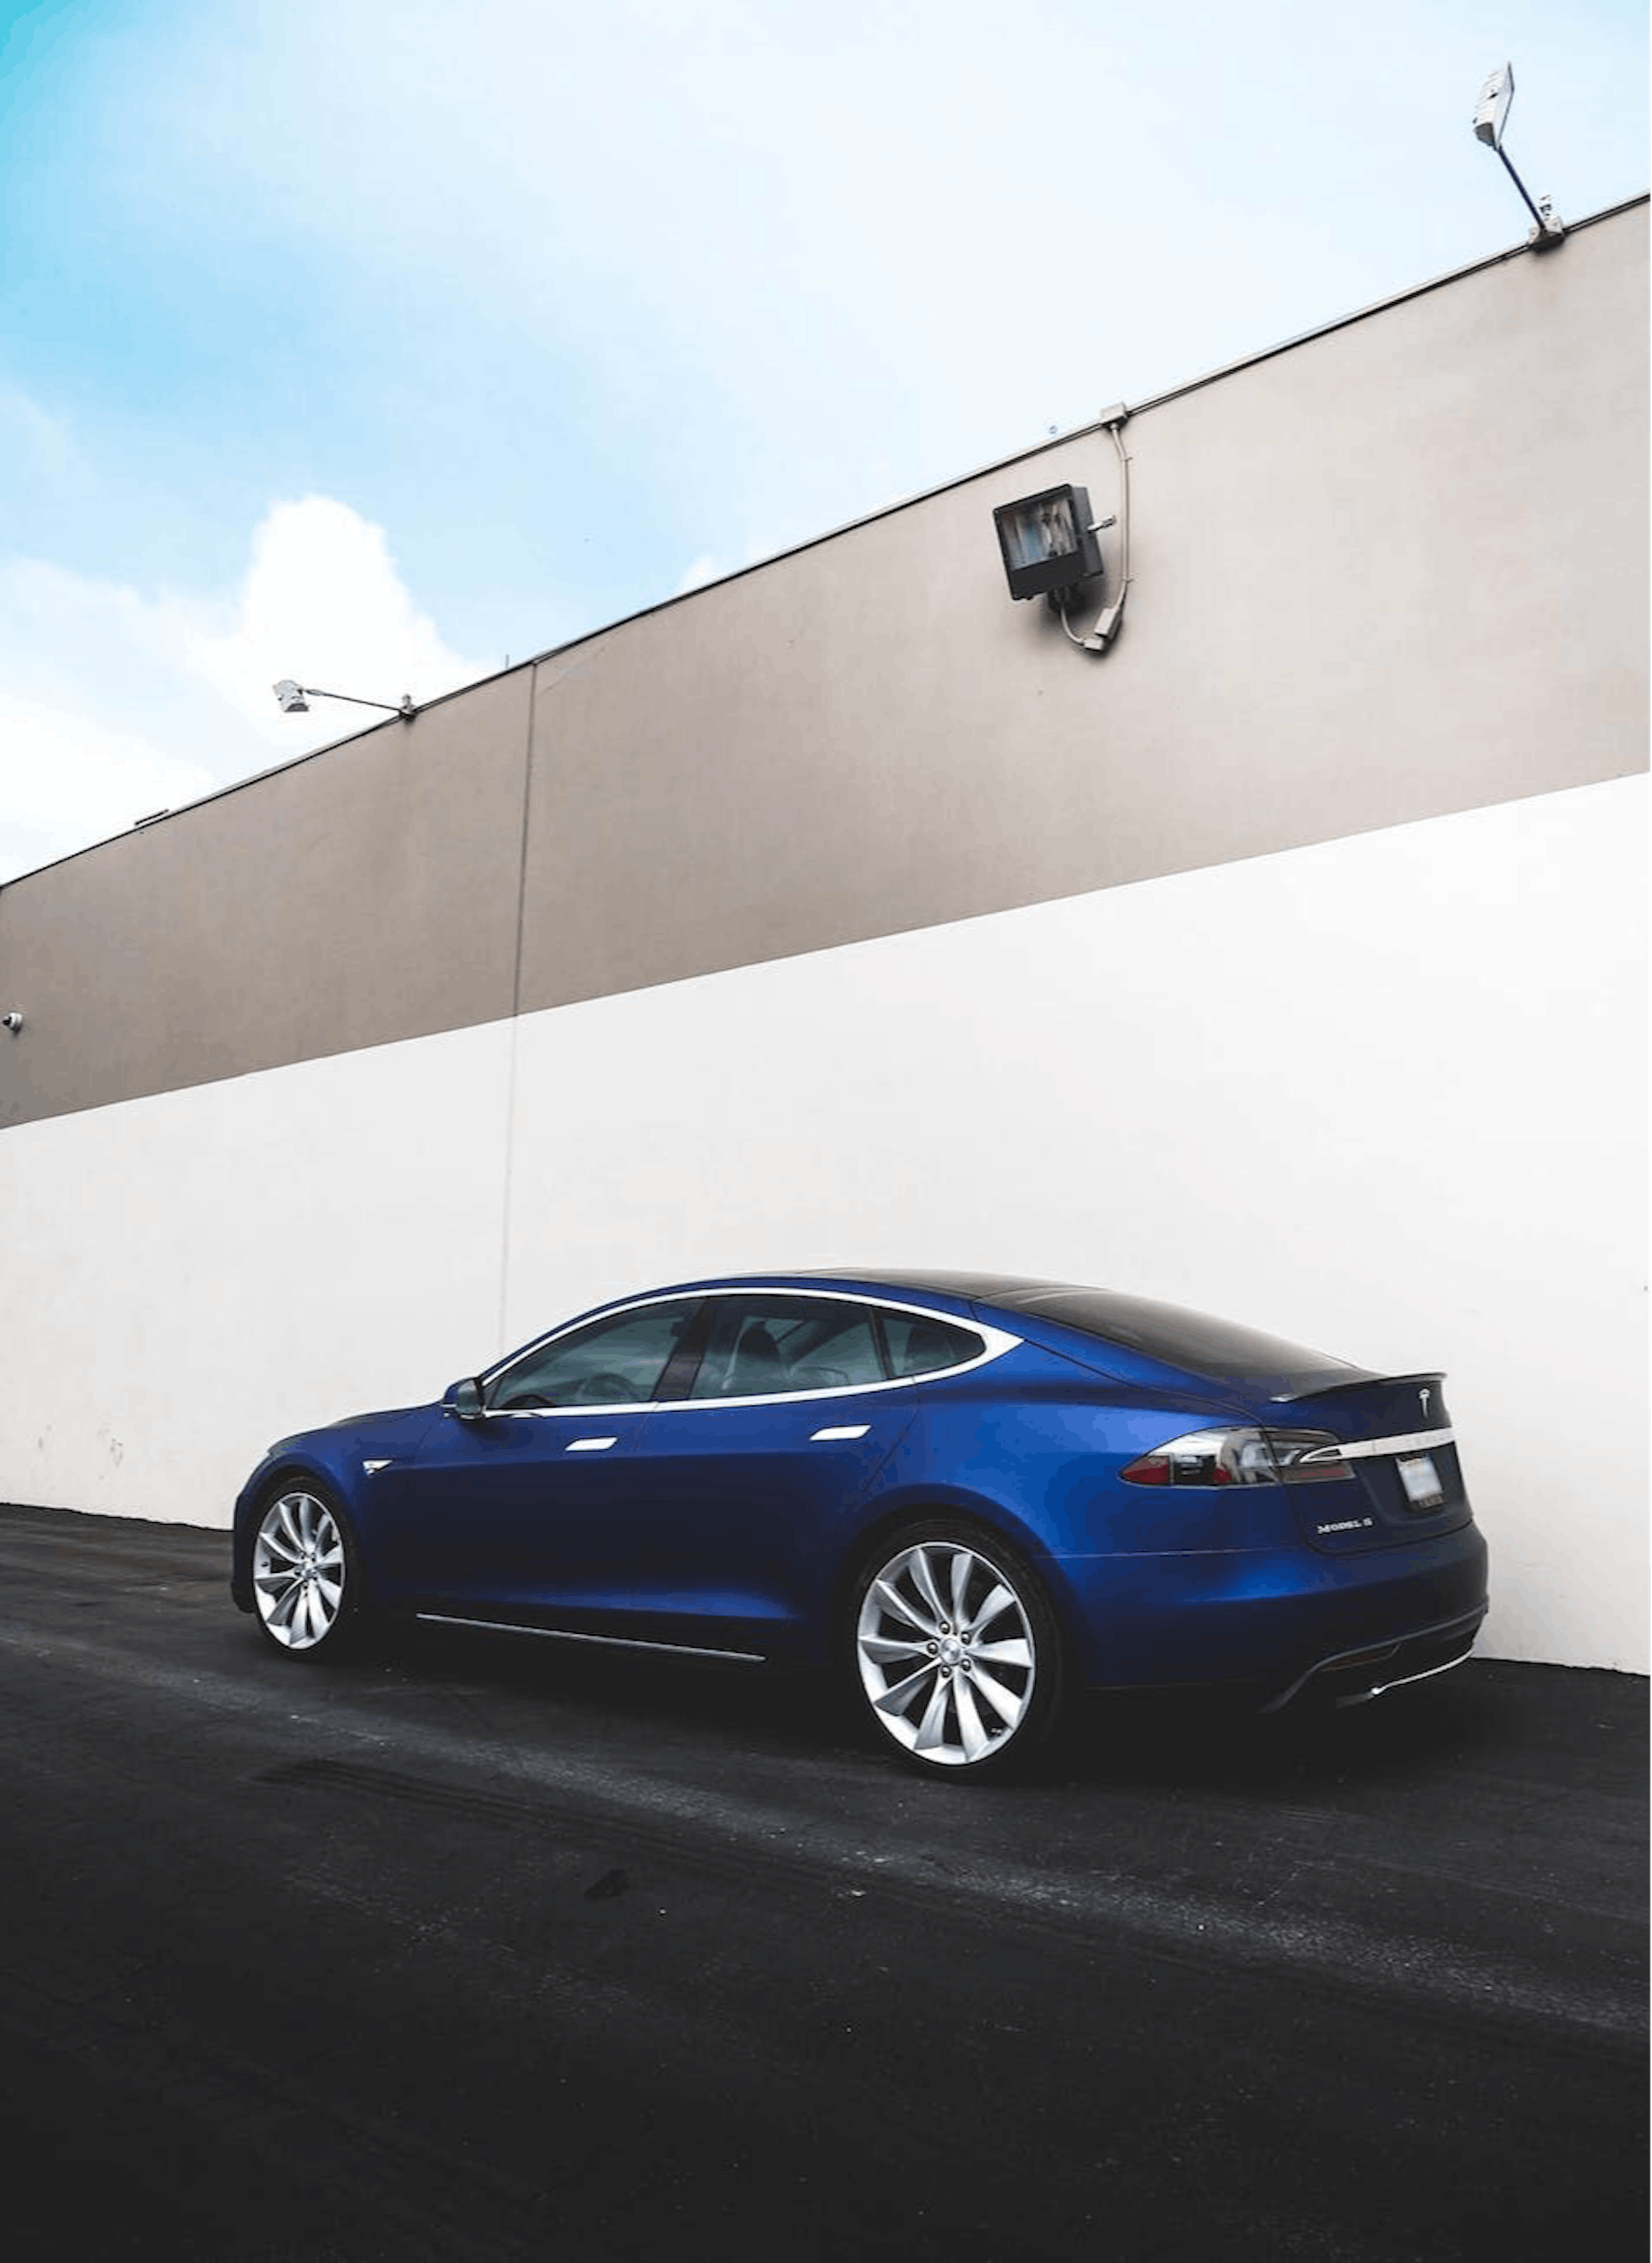 How much does a Tesla cost?